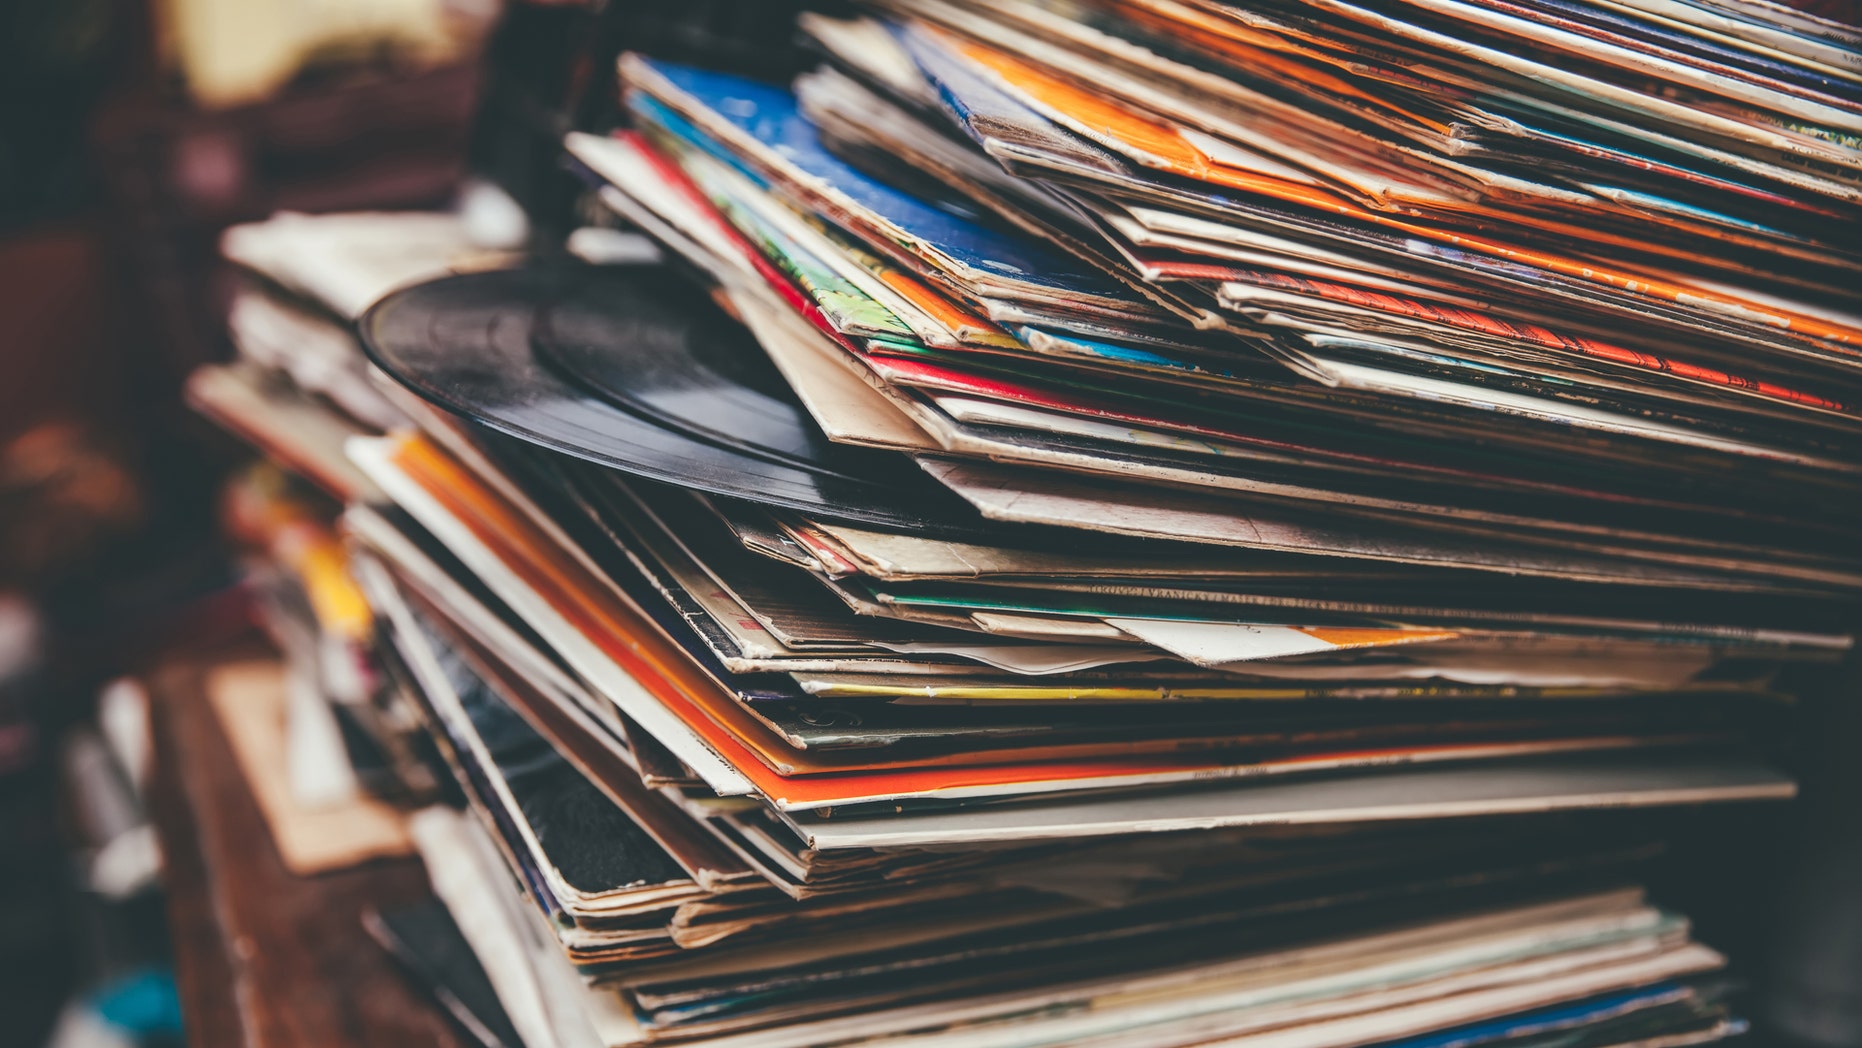 Best Vinyl Records For Collection